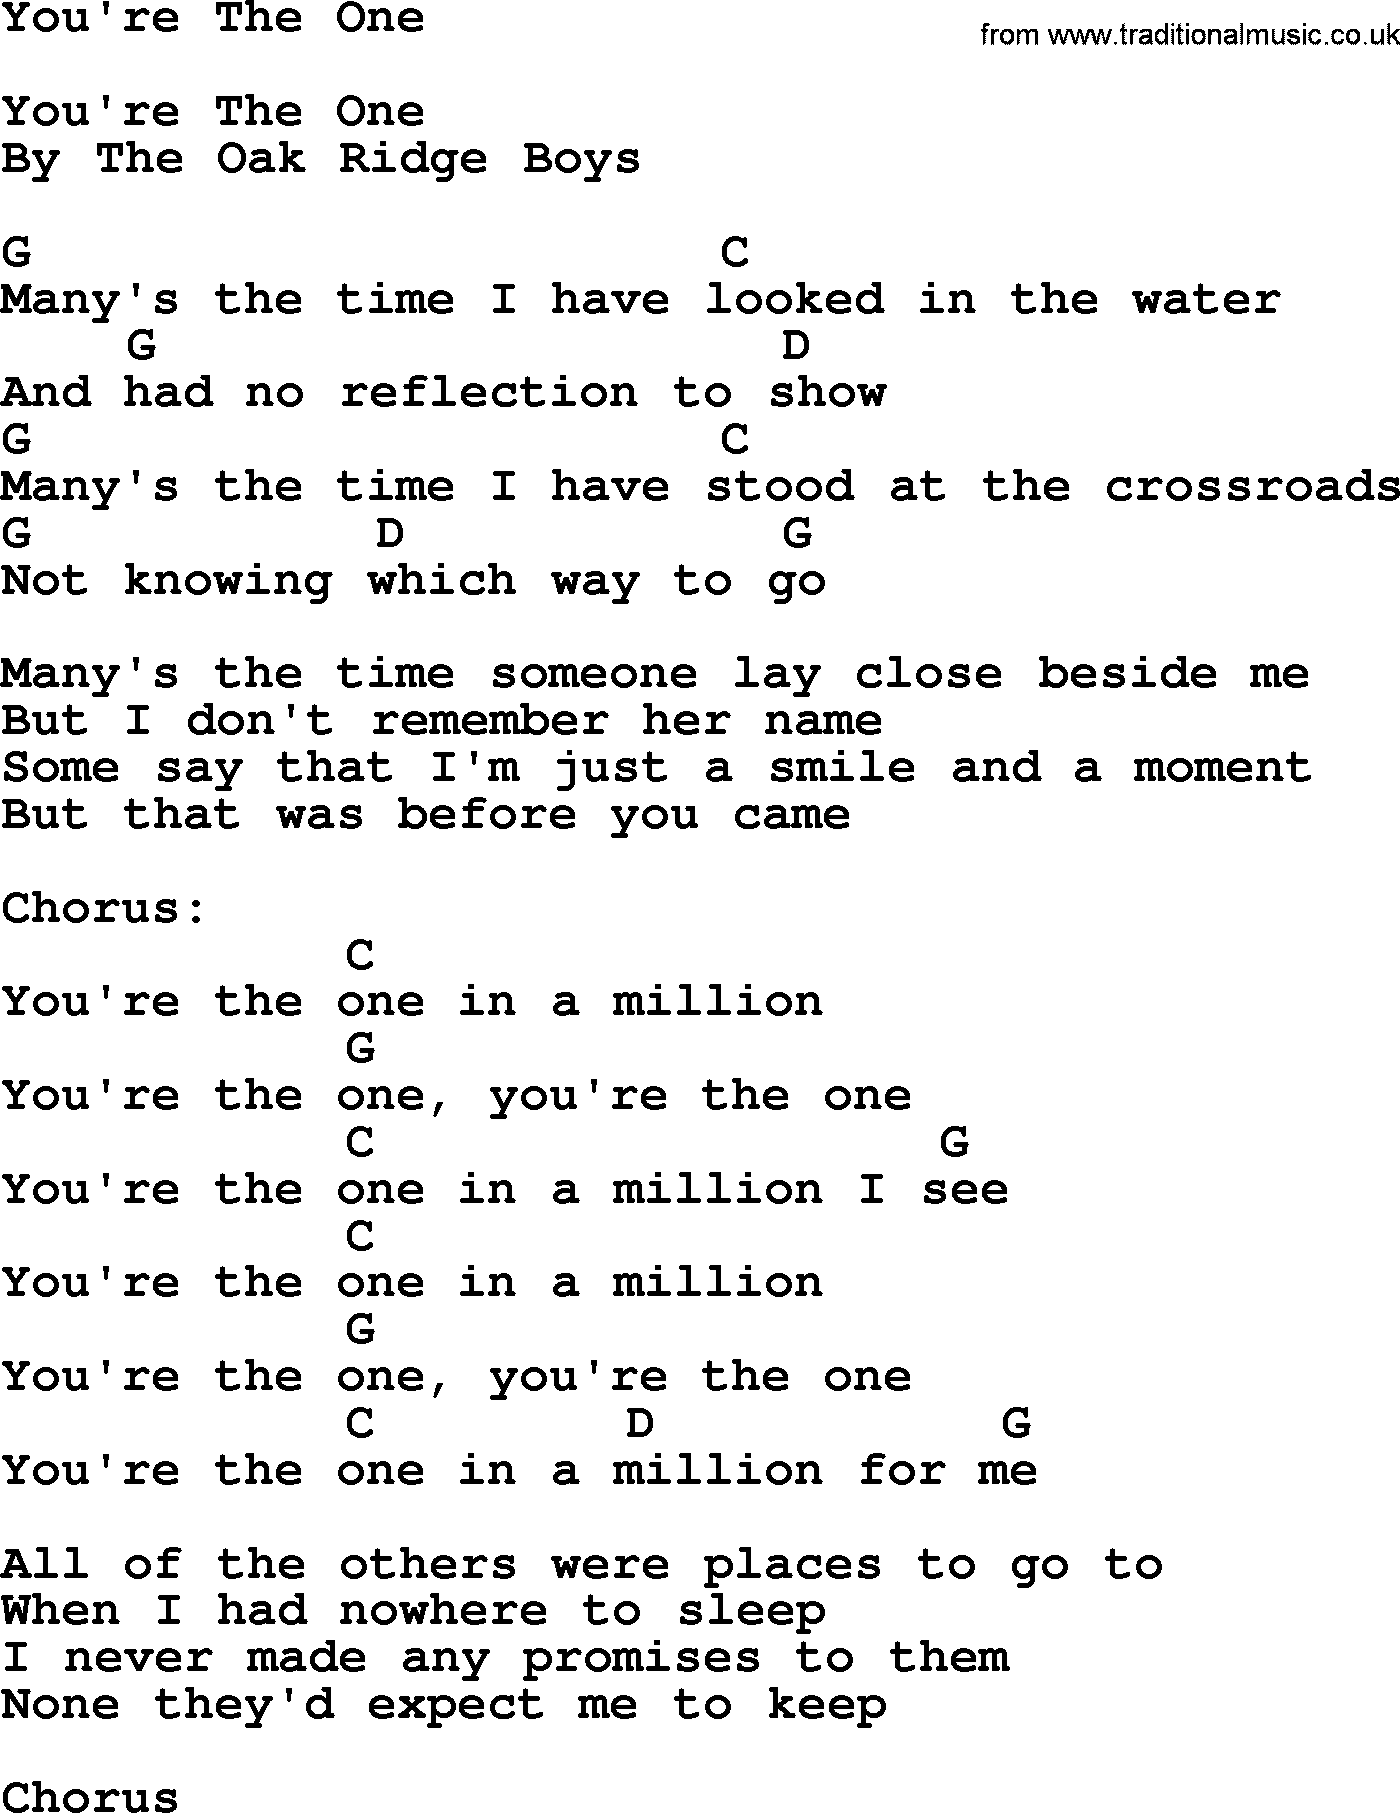 Bluegrass song: You're The One, lyrics and chords